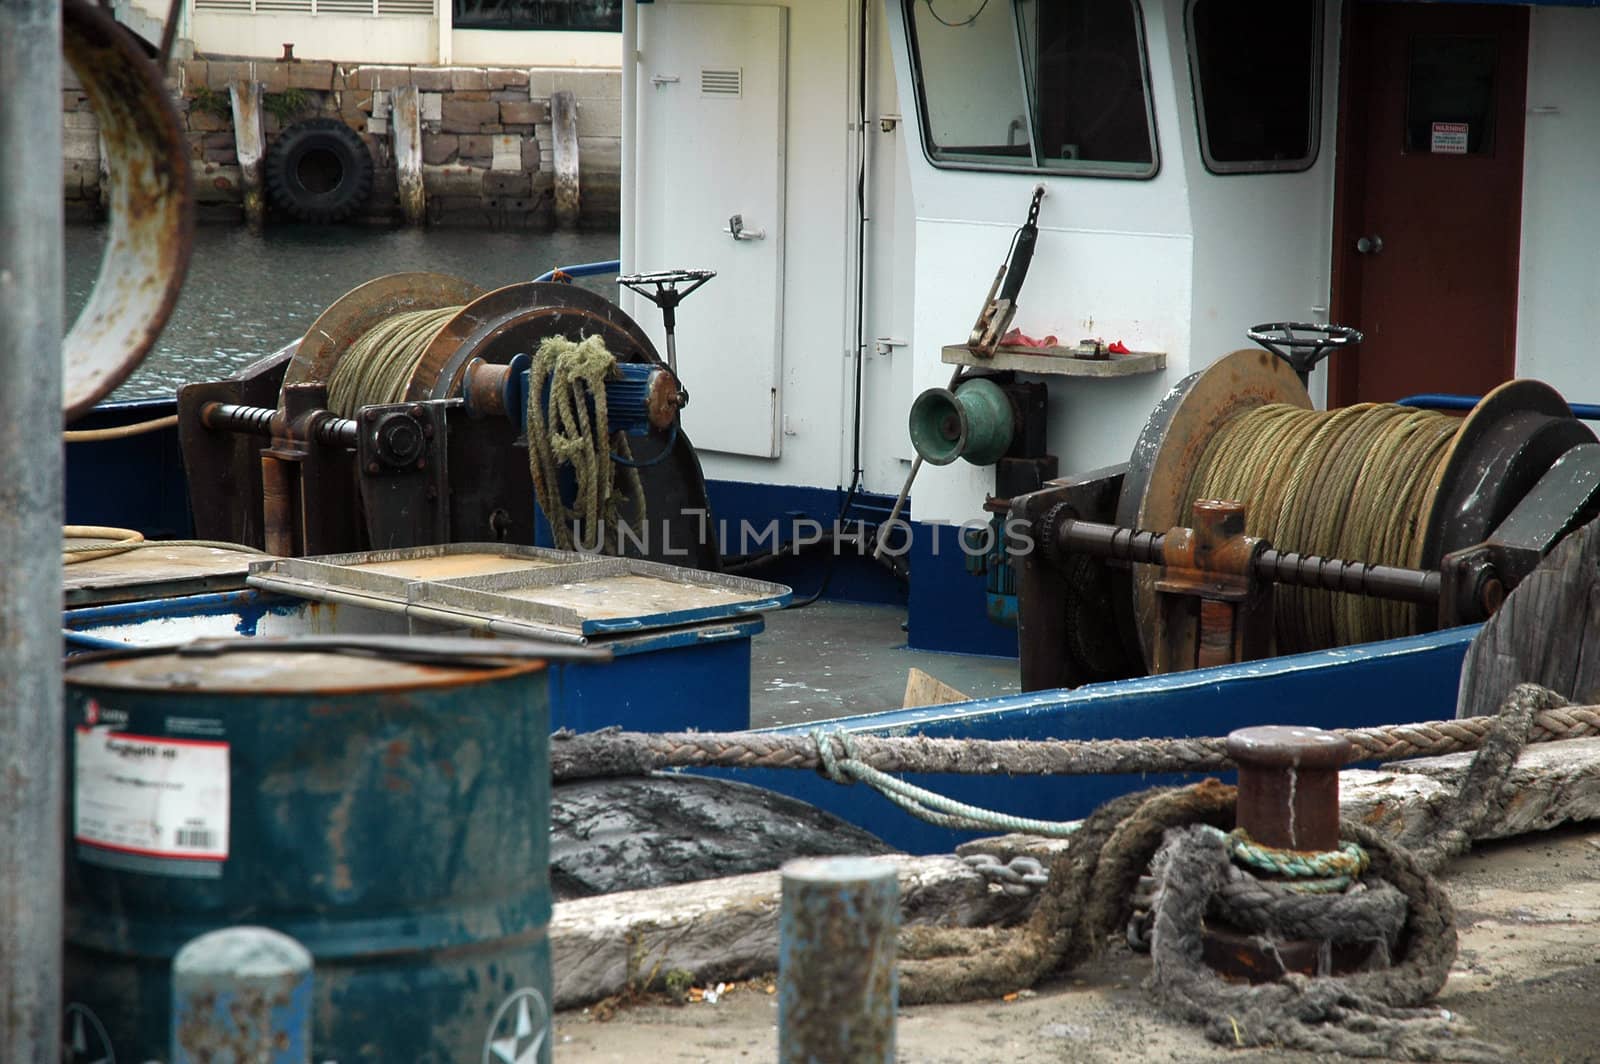 fishing boat equipment, old rusty boat, ropes